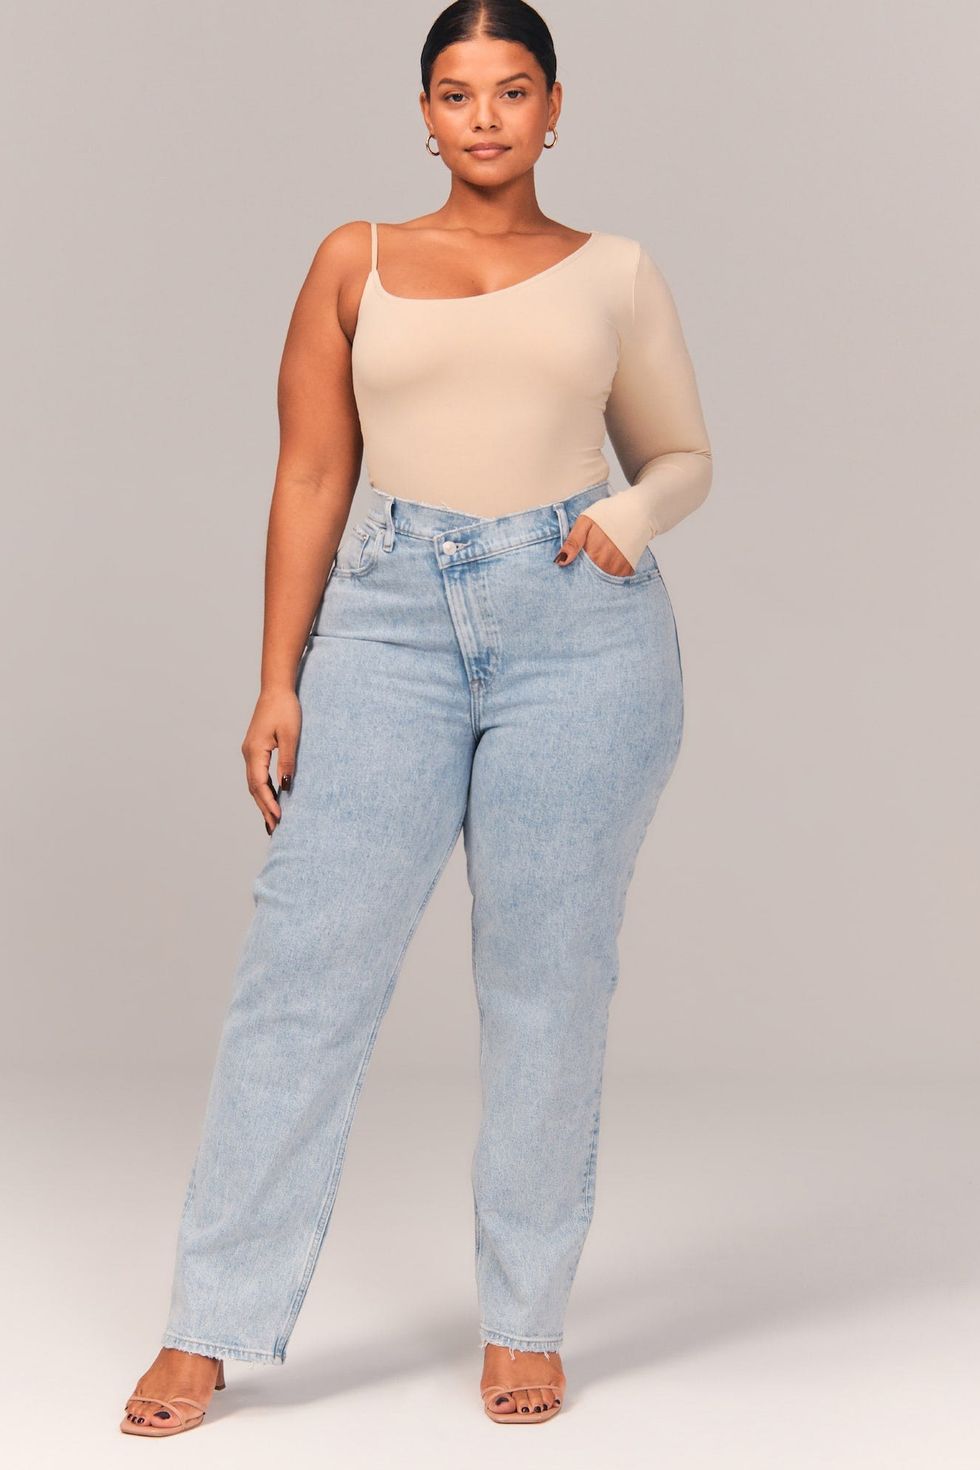 Jeans For Plus Size Women: How To Wear And Style Them Right